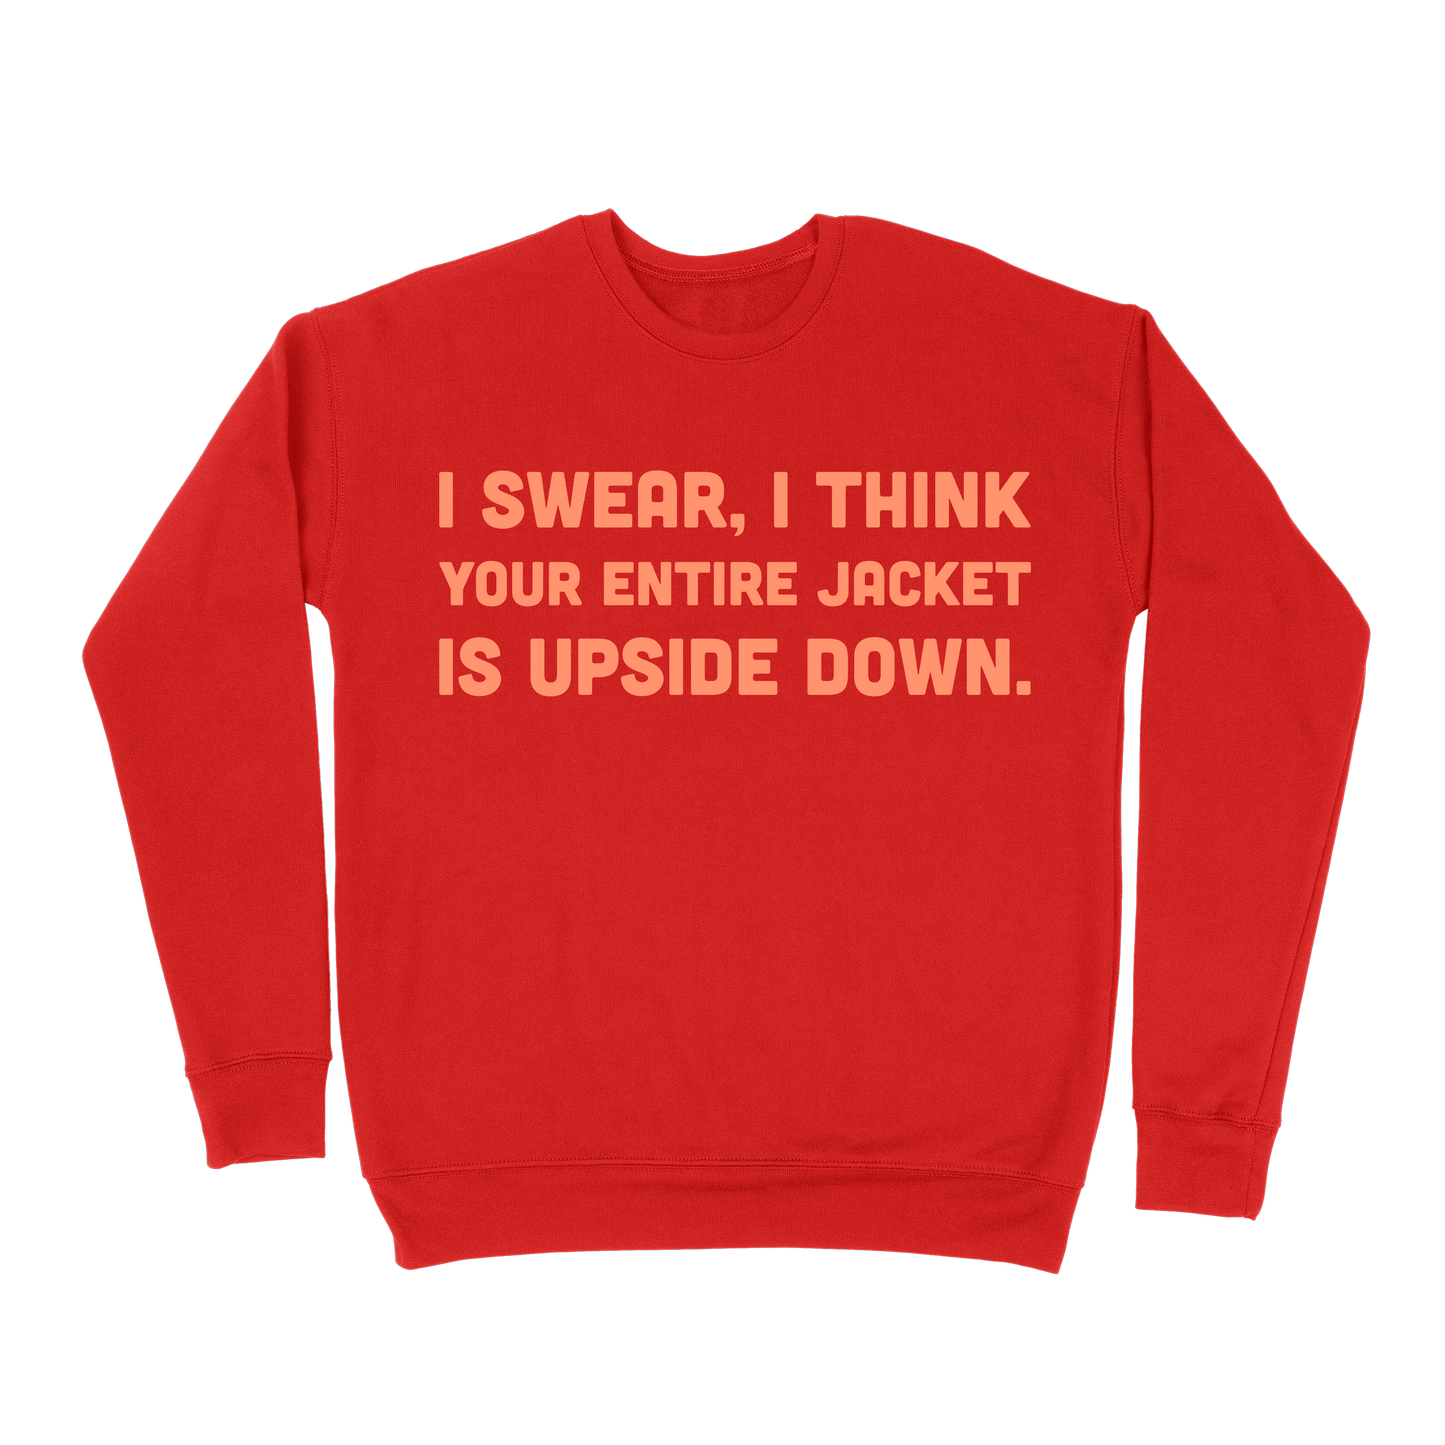 I Swear, I Think Your Entire Jacket Is Upside Down Sweatshirt - Red